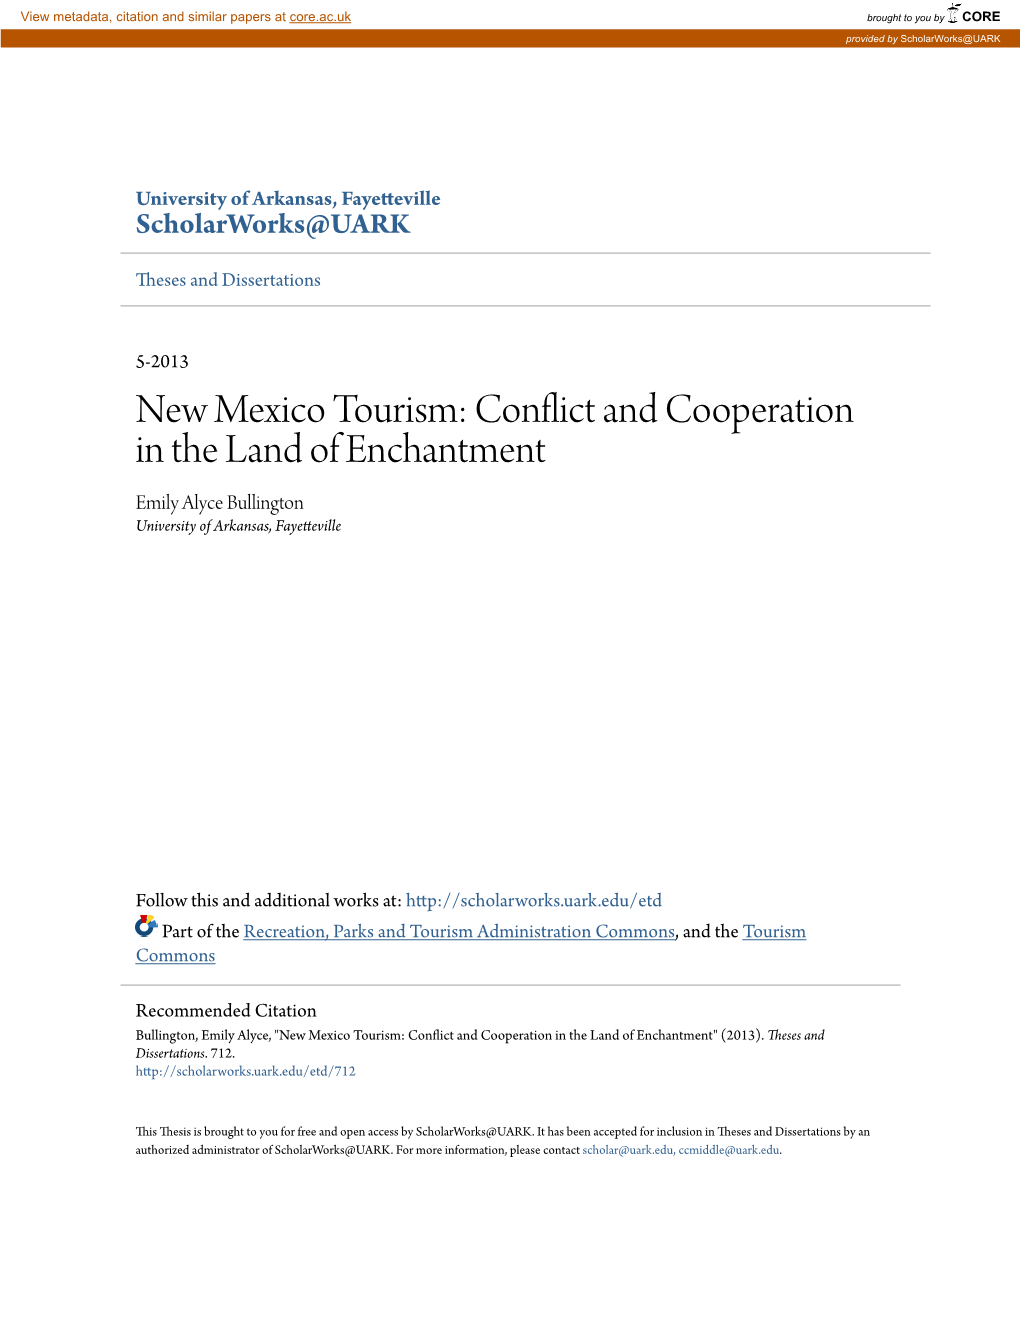 New Mexico Tourism: Conflict and Cooperation in the Land of Enchantment Emily Alyce Bullington University of Arkansas, Fayetteville